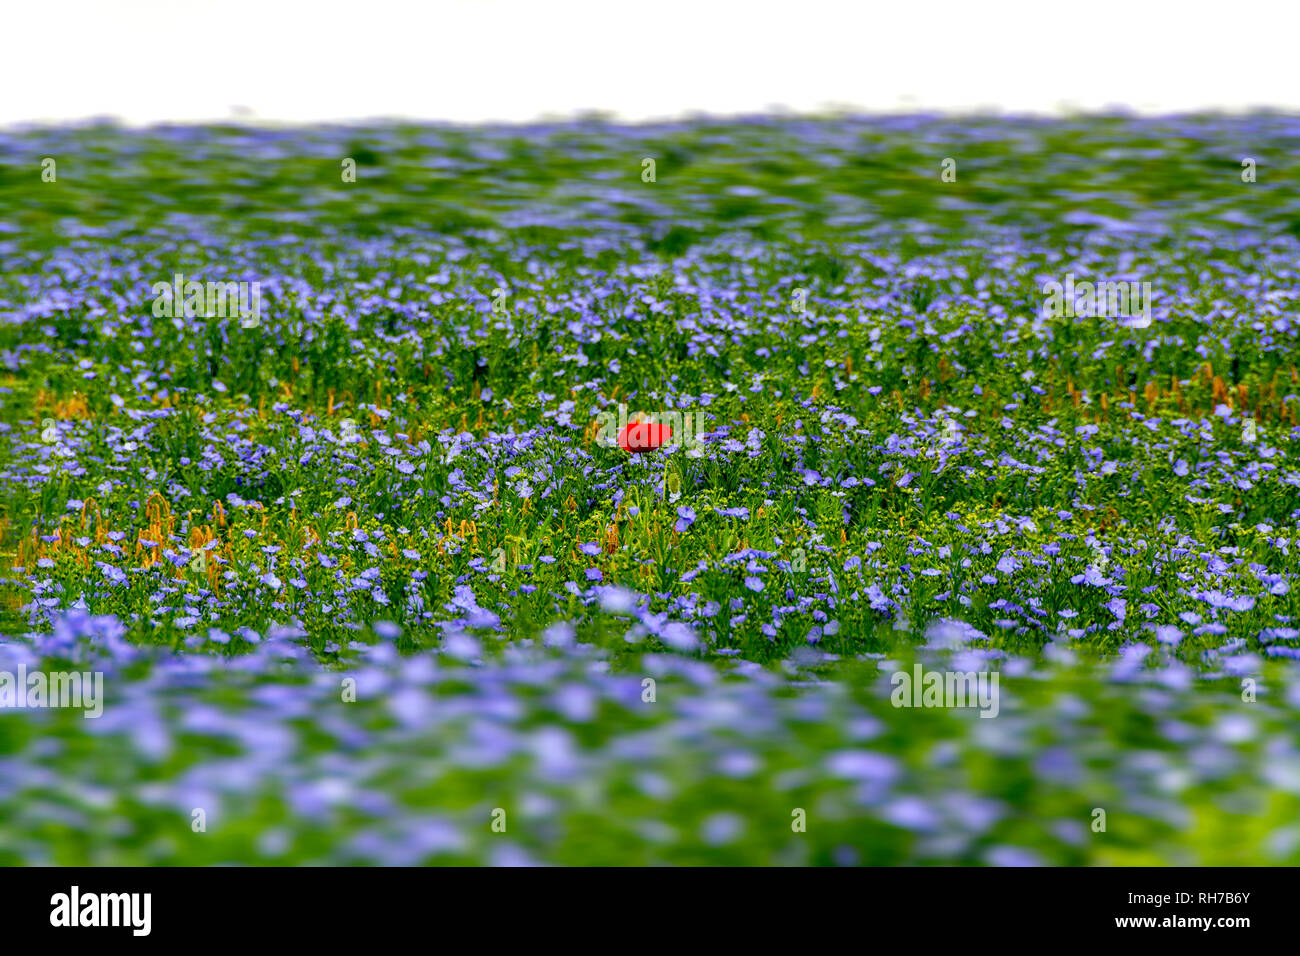 Field of poppies (Papaver) and flax field (Linum) in flower, Puy de dome department, Auvergne Rhone Alpes, France, Europe Stock Photo